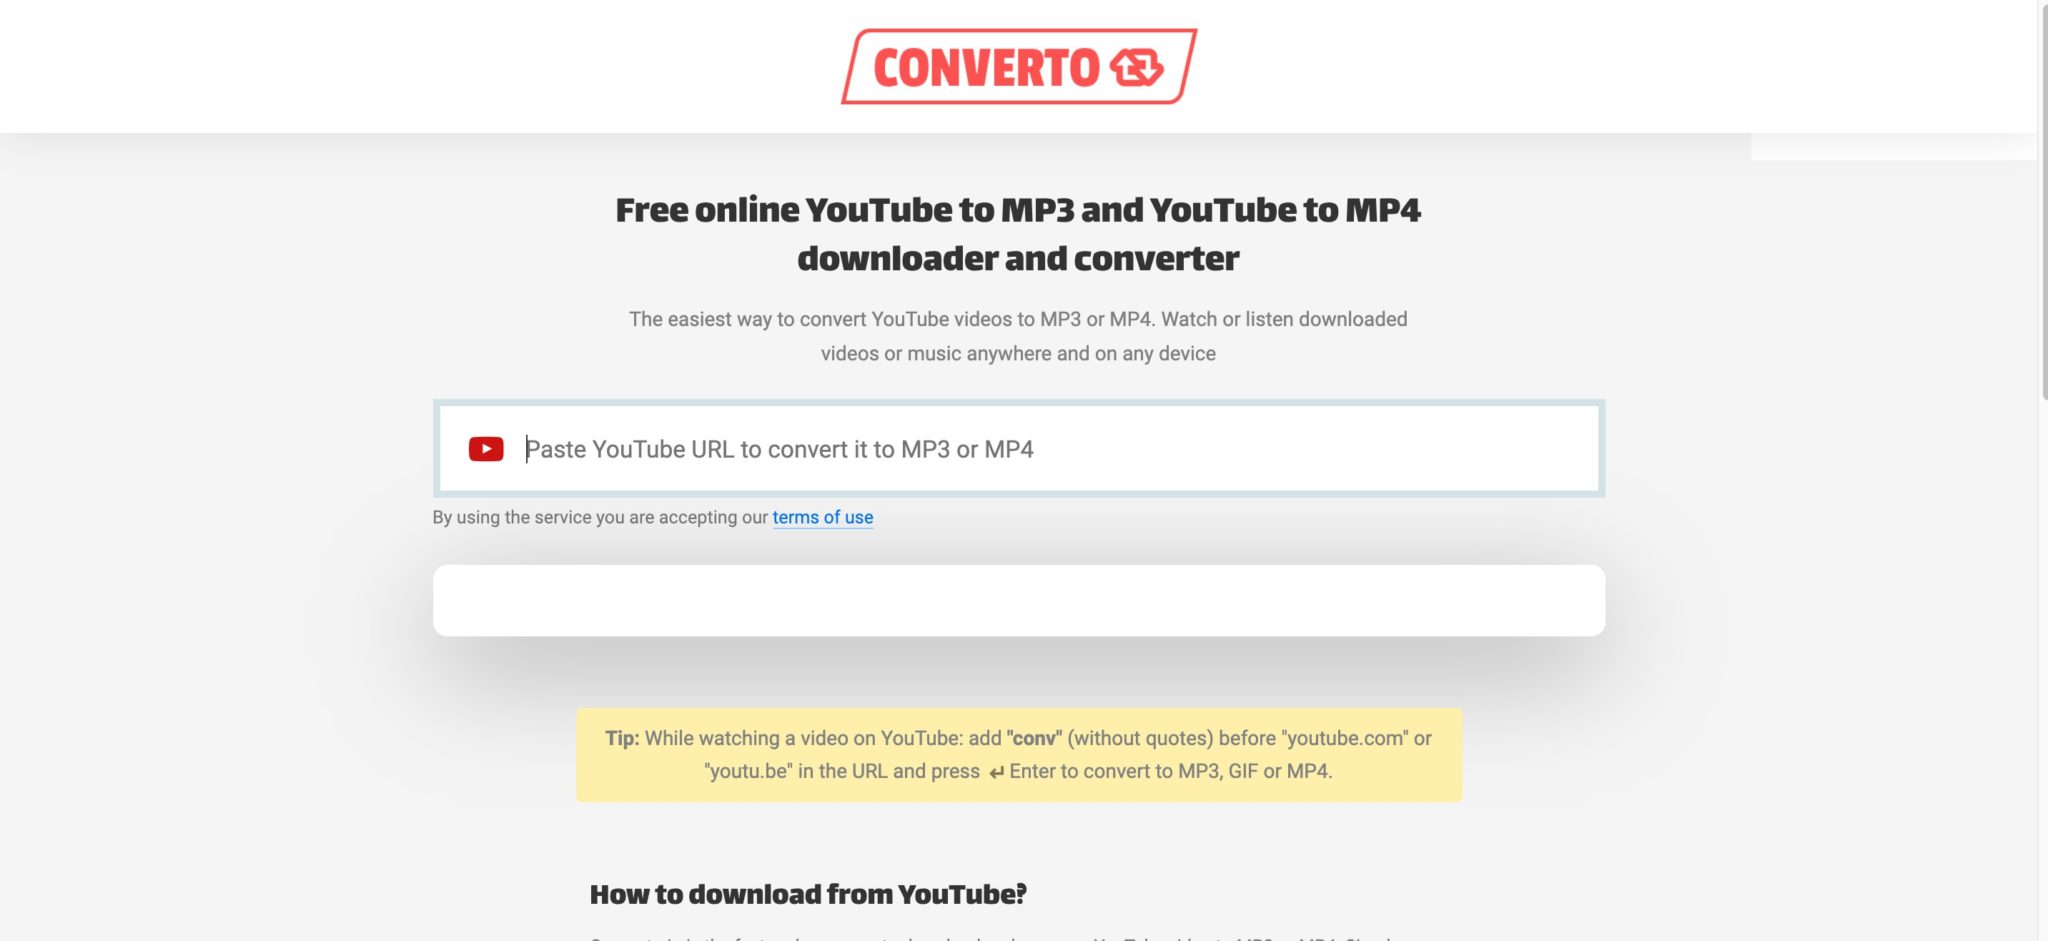 instal the new version for ios MP3Studio YouTube Downloader 2.0.25.3